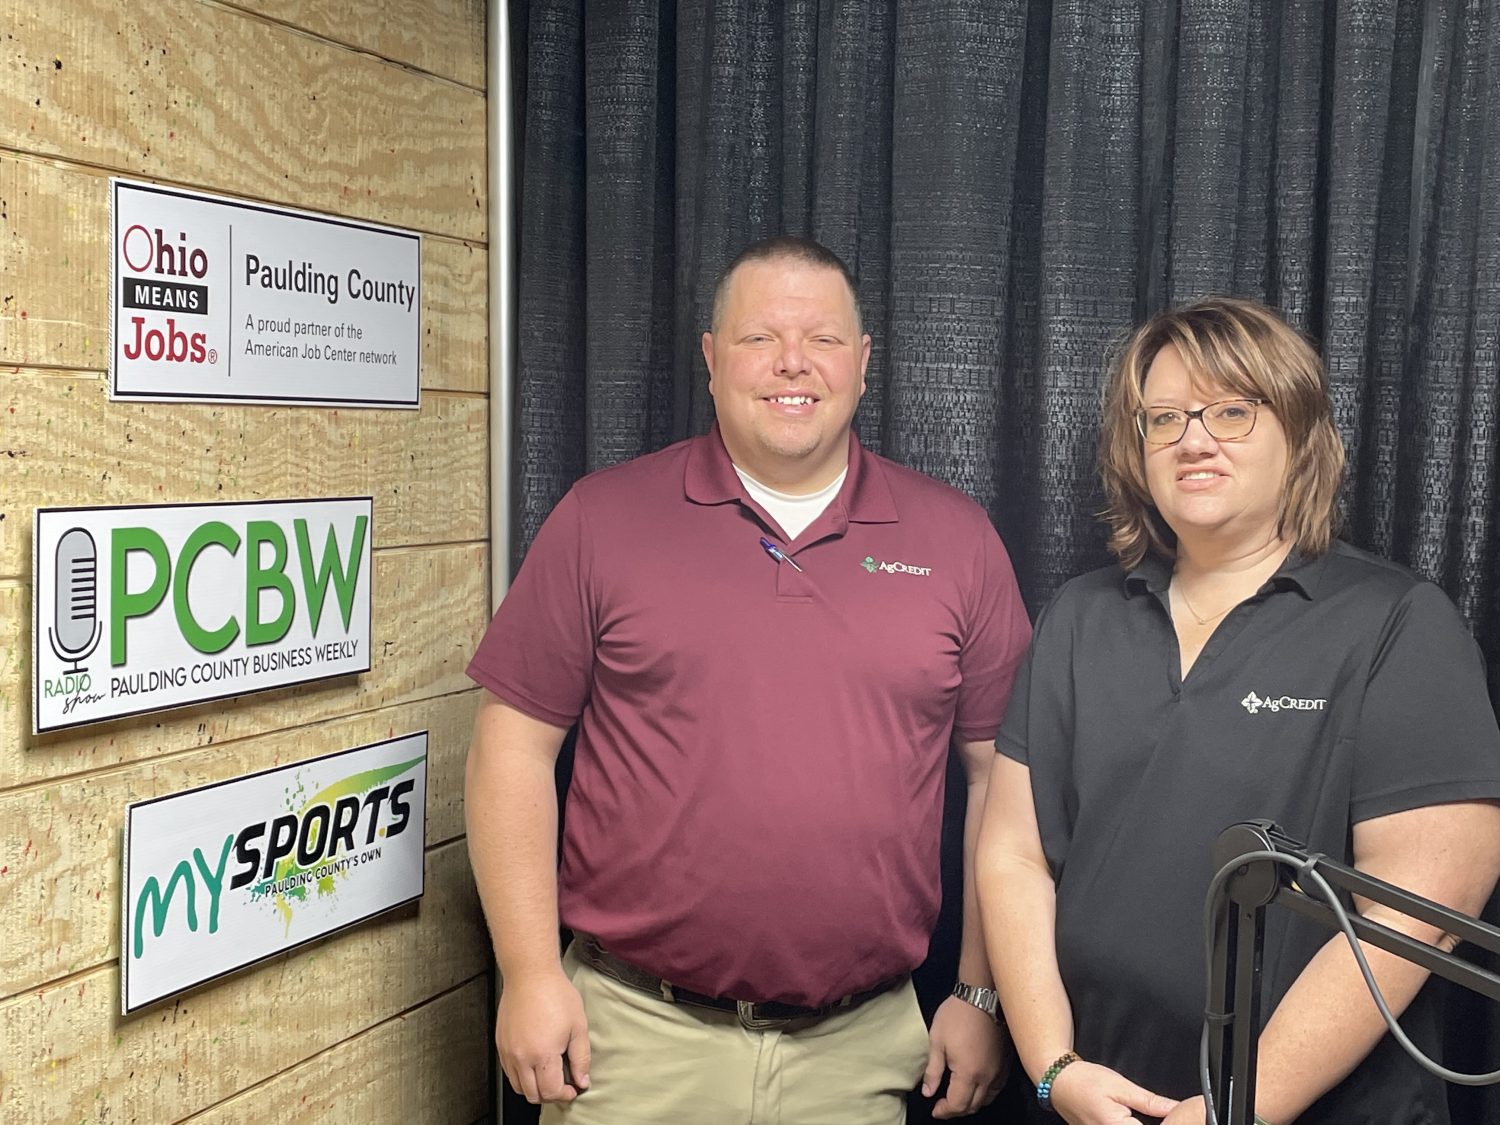 Next guest on Paulding County Business Weekly: AgCredit